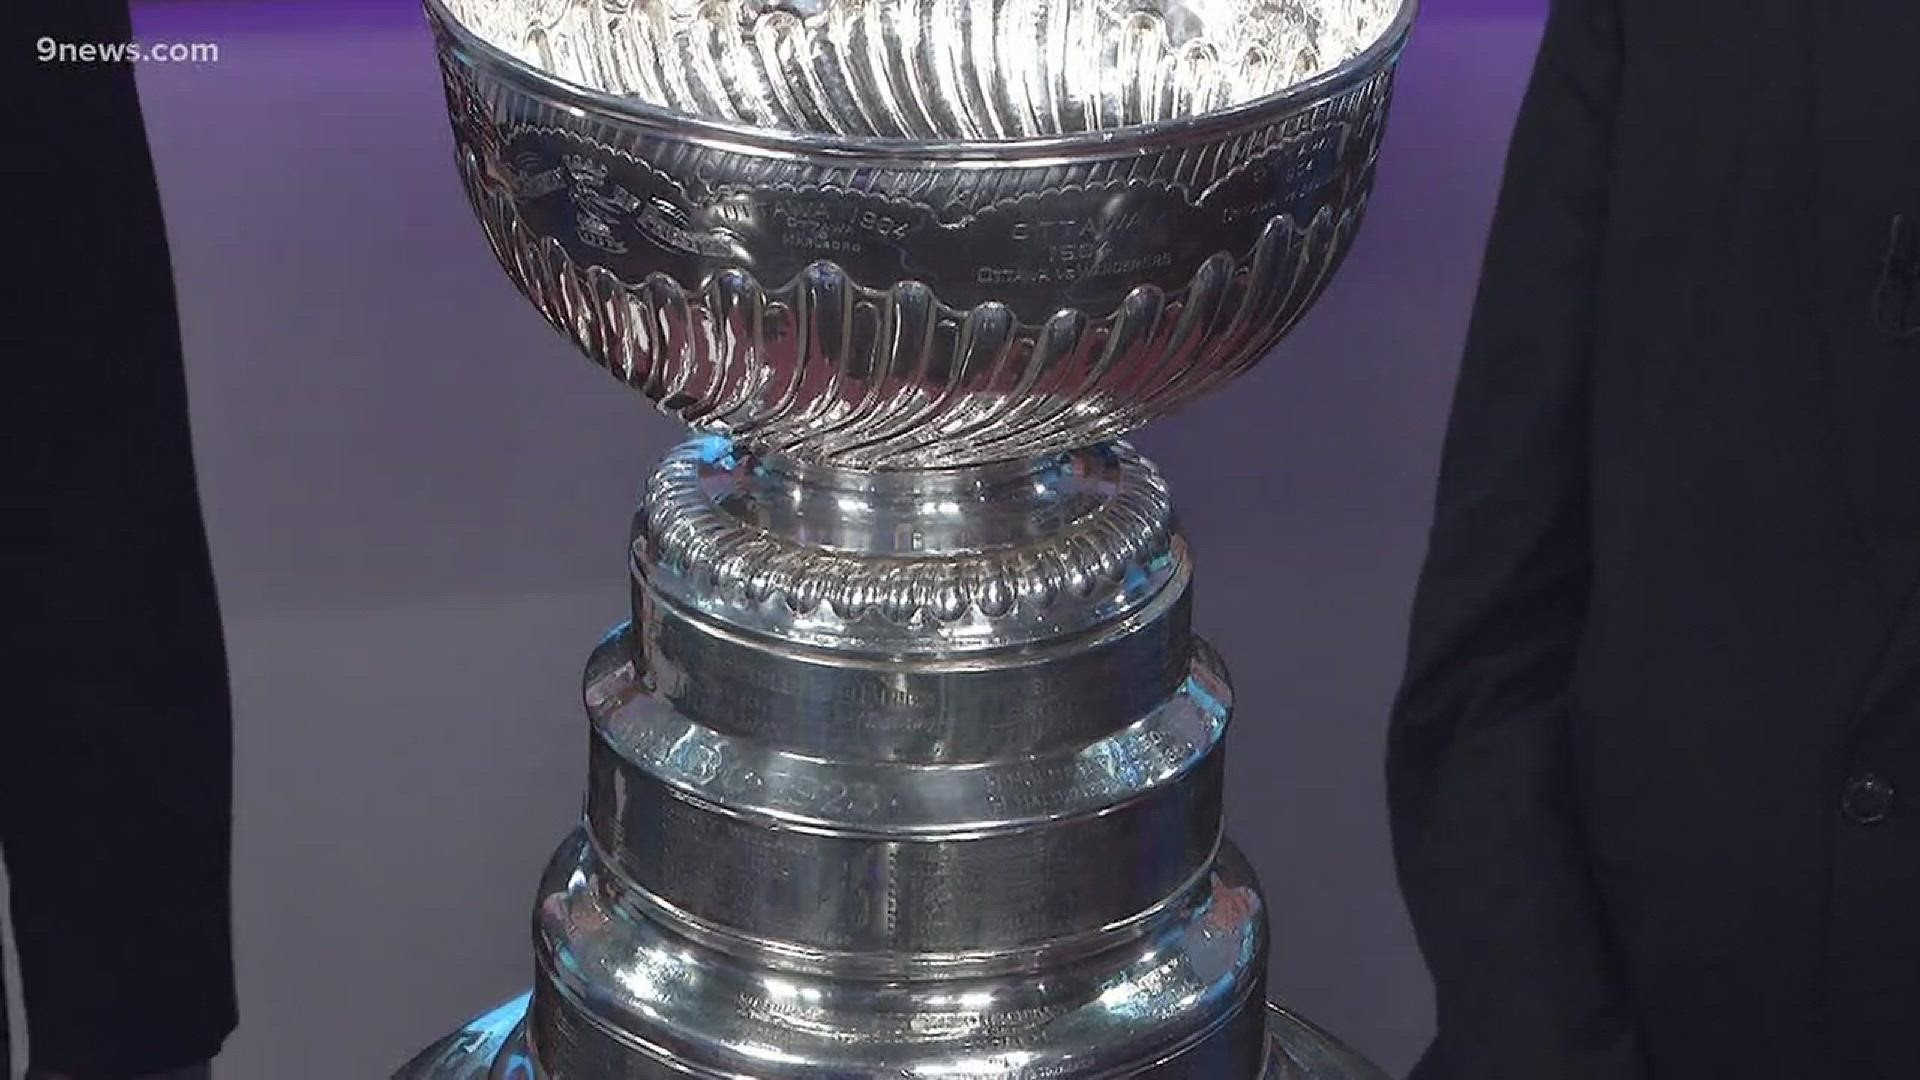 It's the most famous trophy in sports. NHL players work their whole lives to earn the right to touch it. It's the Stanley Cup, and it's taking a tour of Denver Thursday.